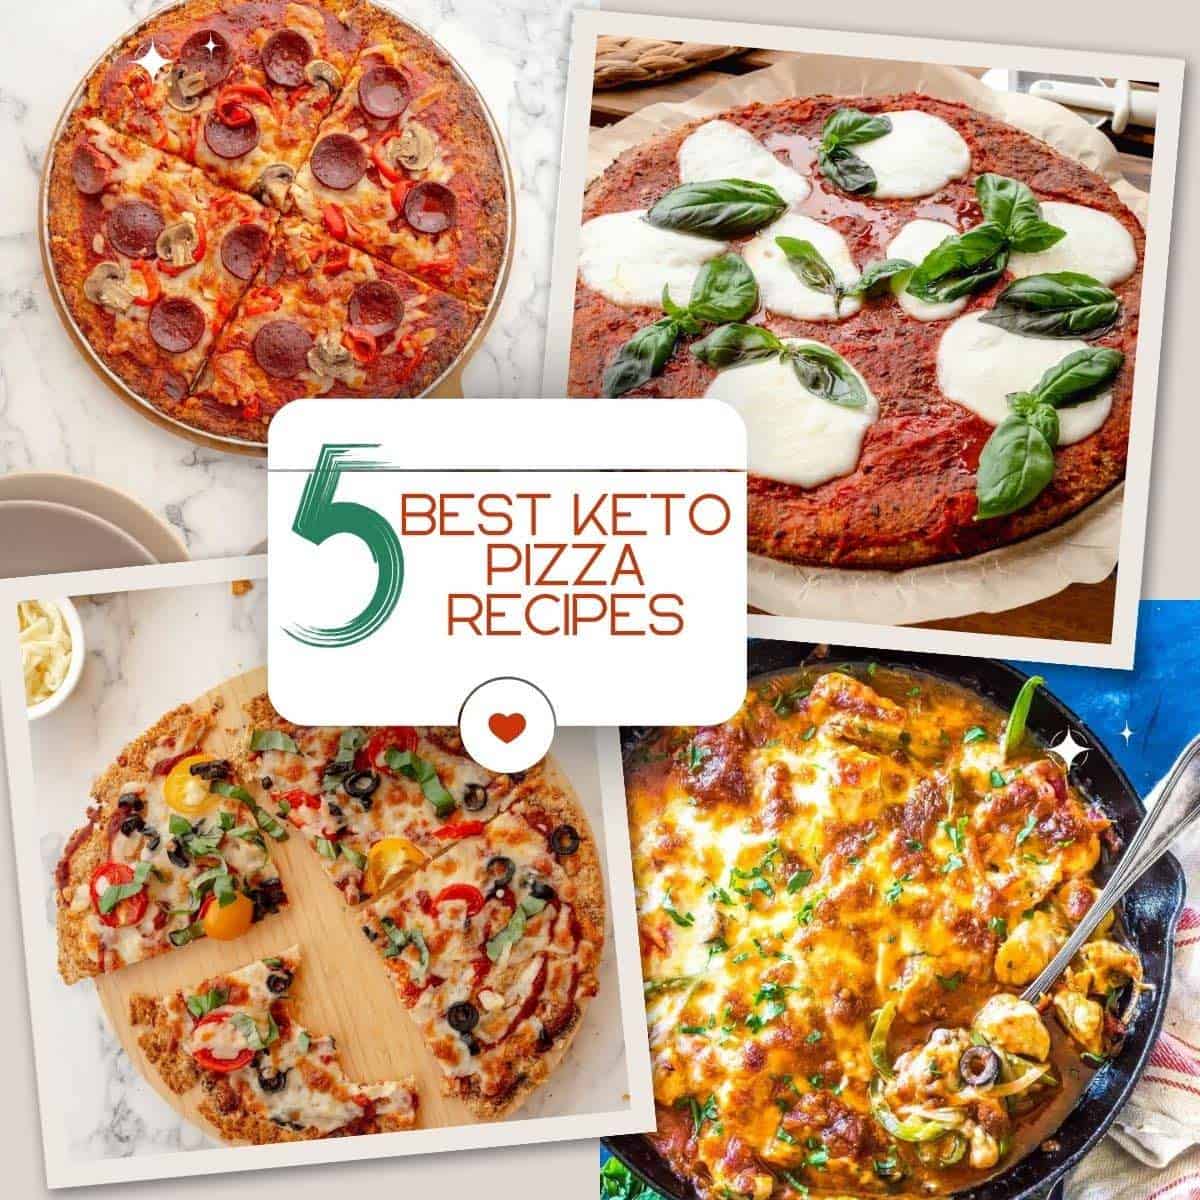 The best keto pizza varieties showcased in a photo compilation.